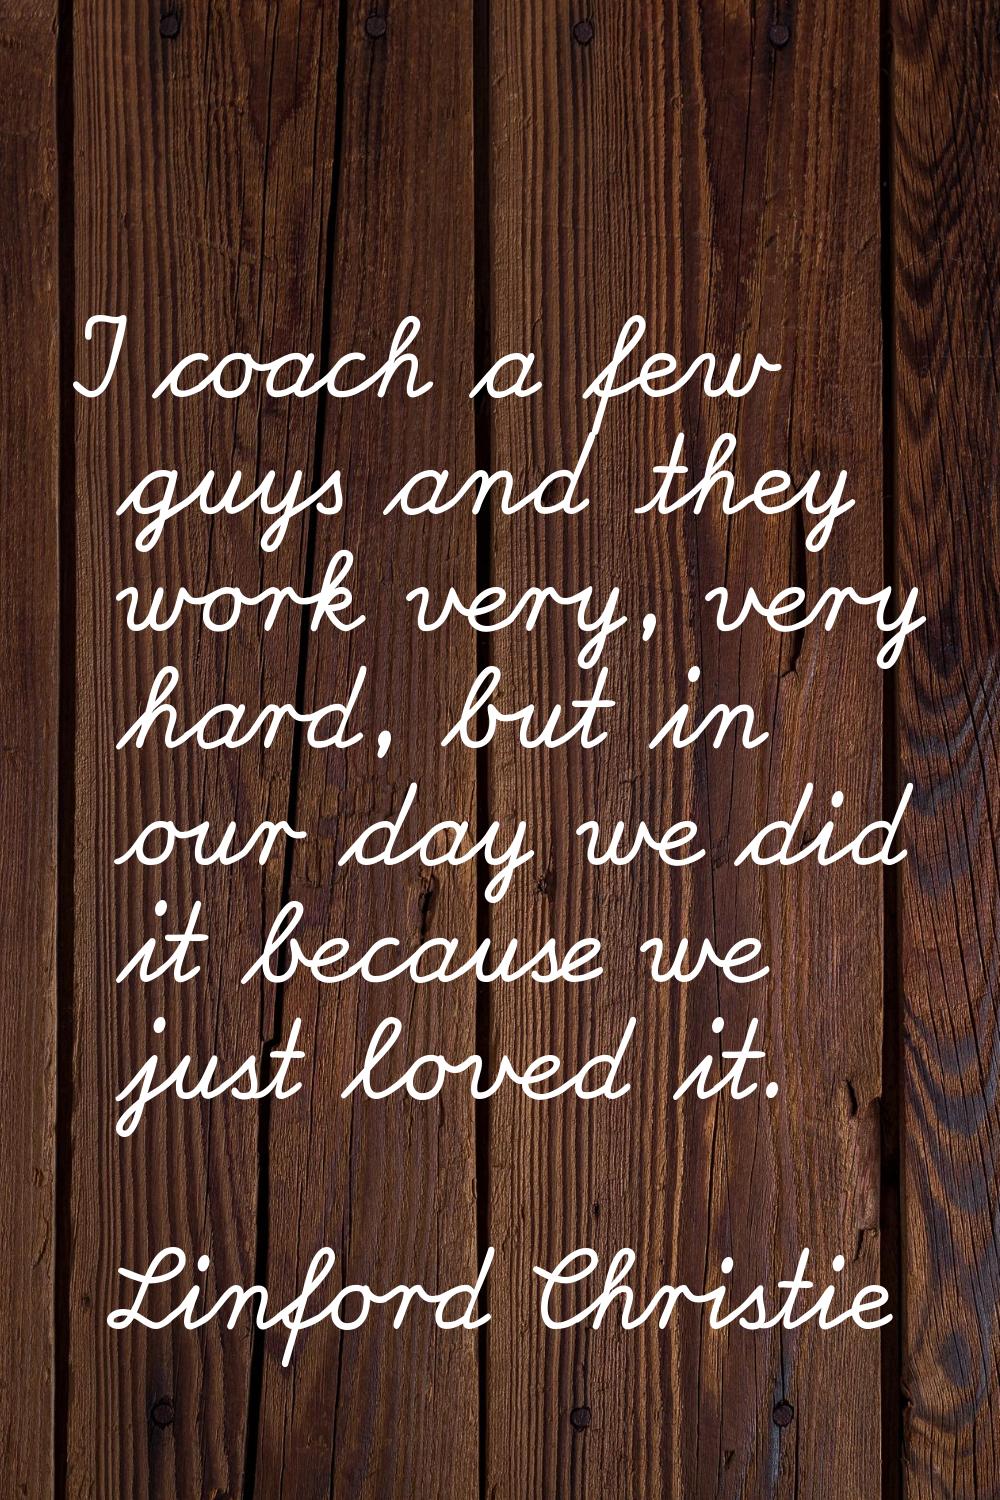 I coach a few guys and they work very, very hard, but in our day we did it because we just loved it